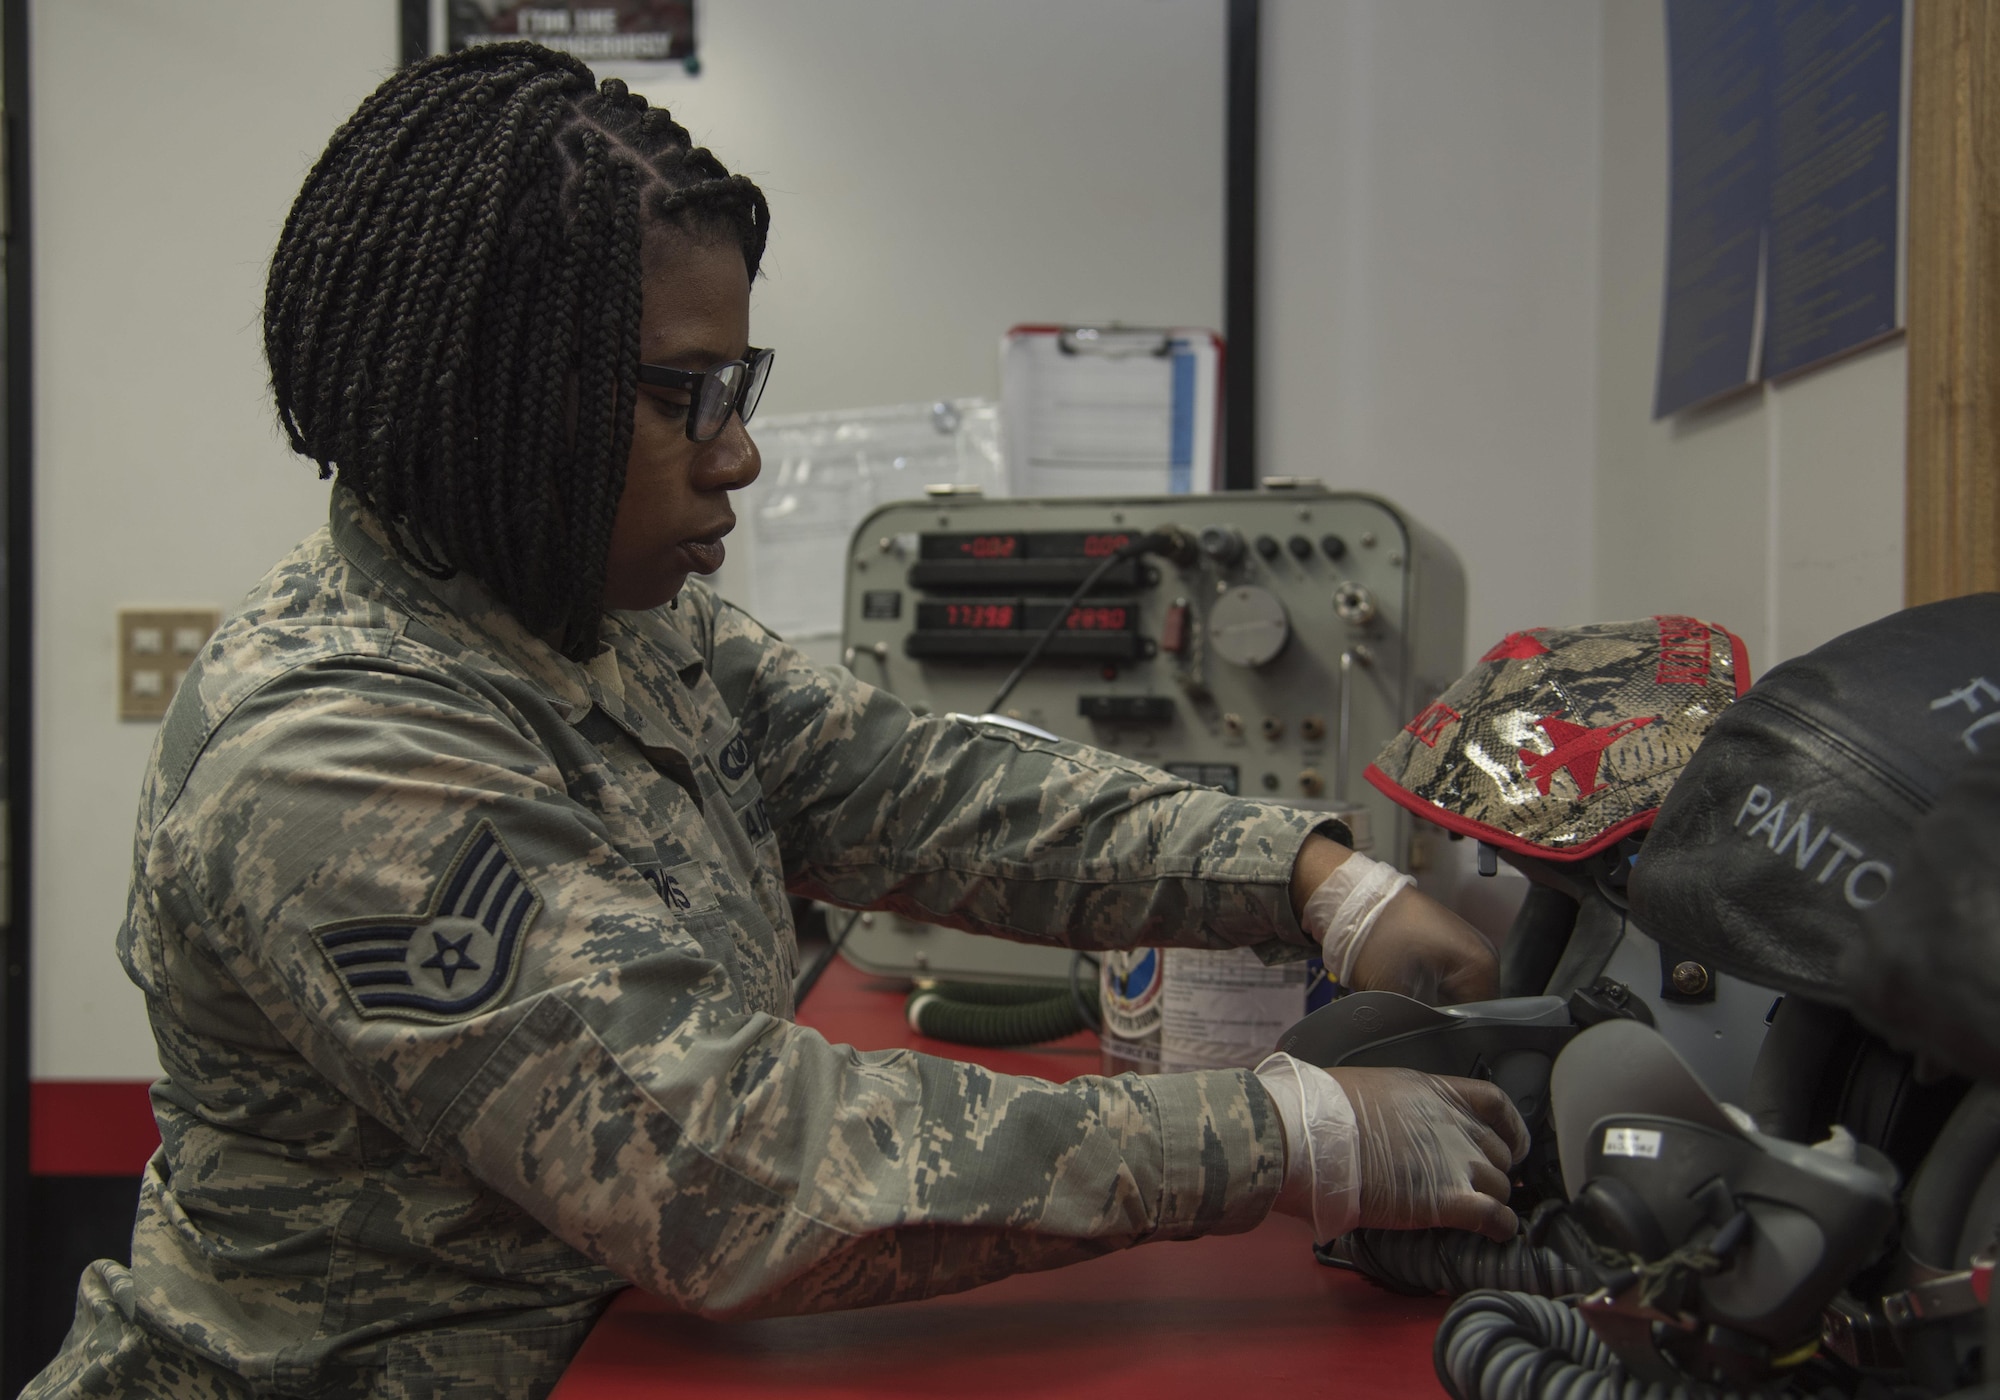 U.S. Air Force Staff Sgt. Faitha Brookins, the 35th Operations Support Squadron aircrew flight equipment NCO in charge, cleans a joint mounted cueing system helmet at Misawa Air Base, Japan, Feb. 8, 2017. Every day the AFE shop maintains the cleanliness and functionality of the pilot's equipment while performing thorough routine checks during their shift. (U.S. Air Force photo by Airman 1st Class Sadie Colbert)